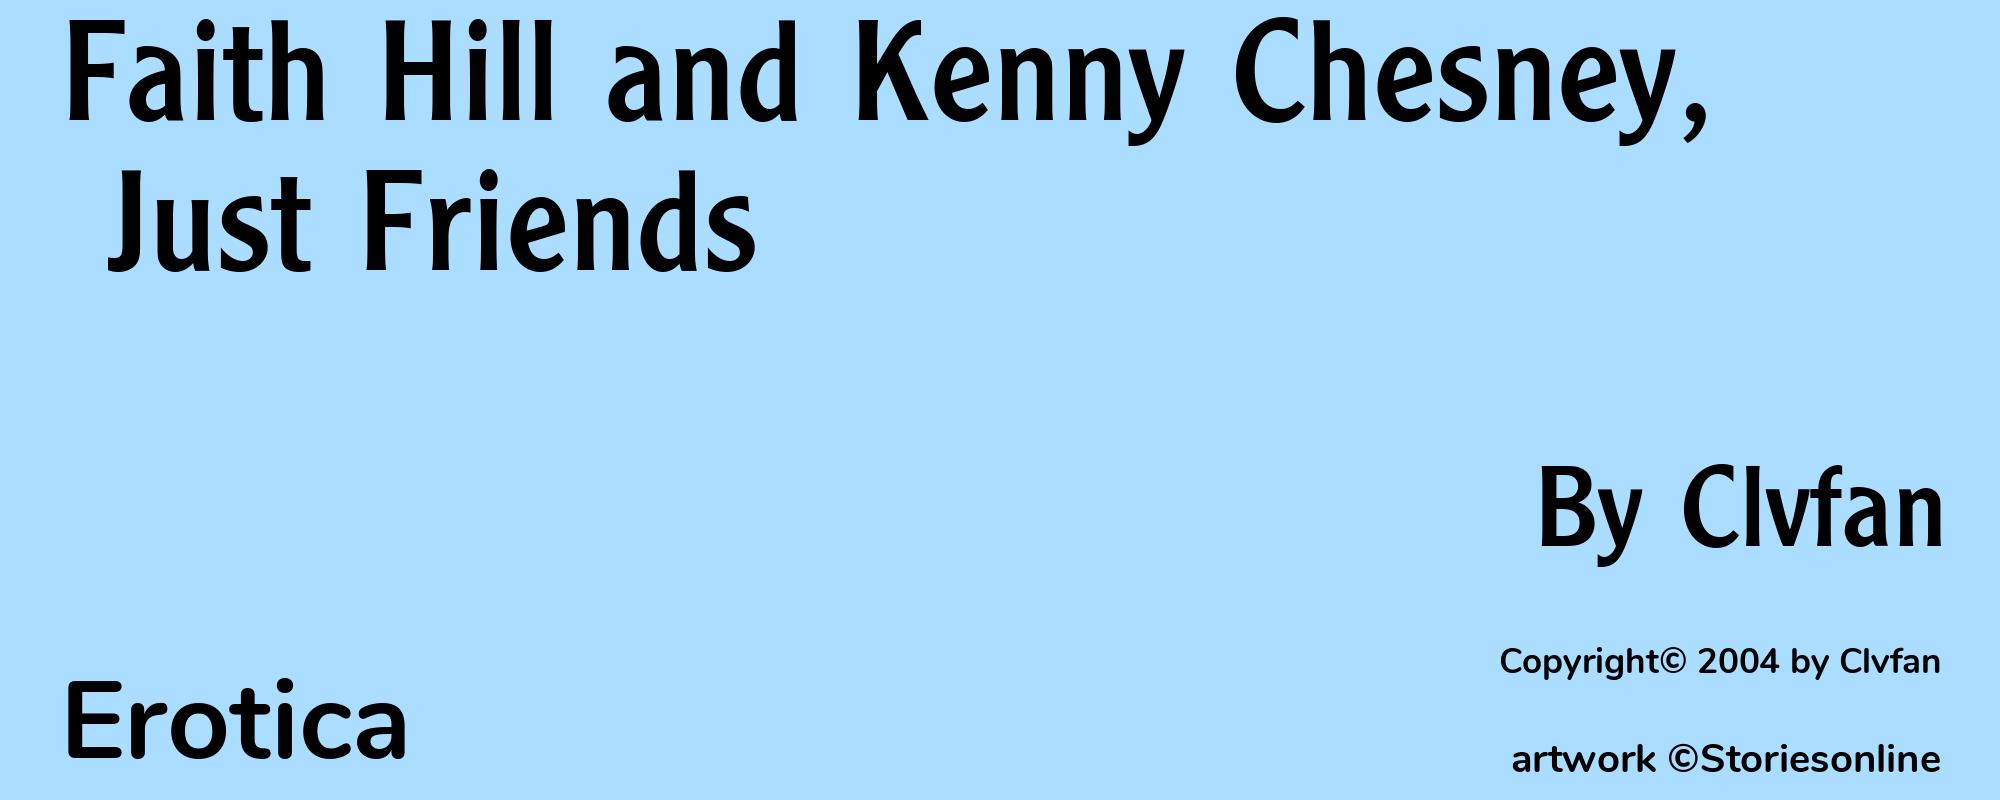 Faith Hill and Kenny Chesney, Just Friends - Cover